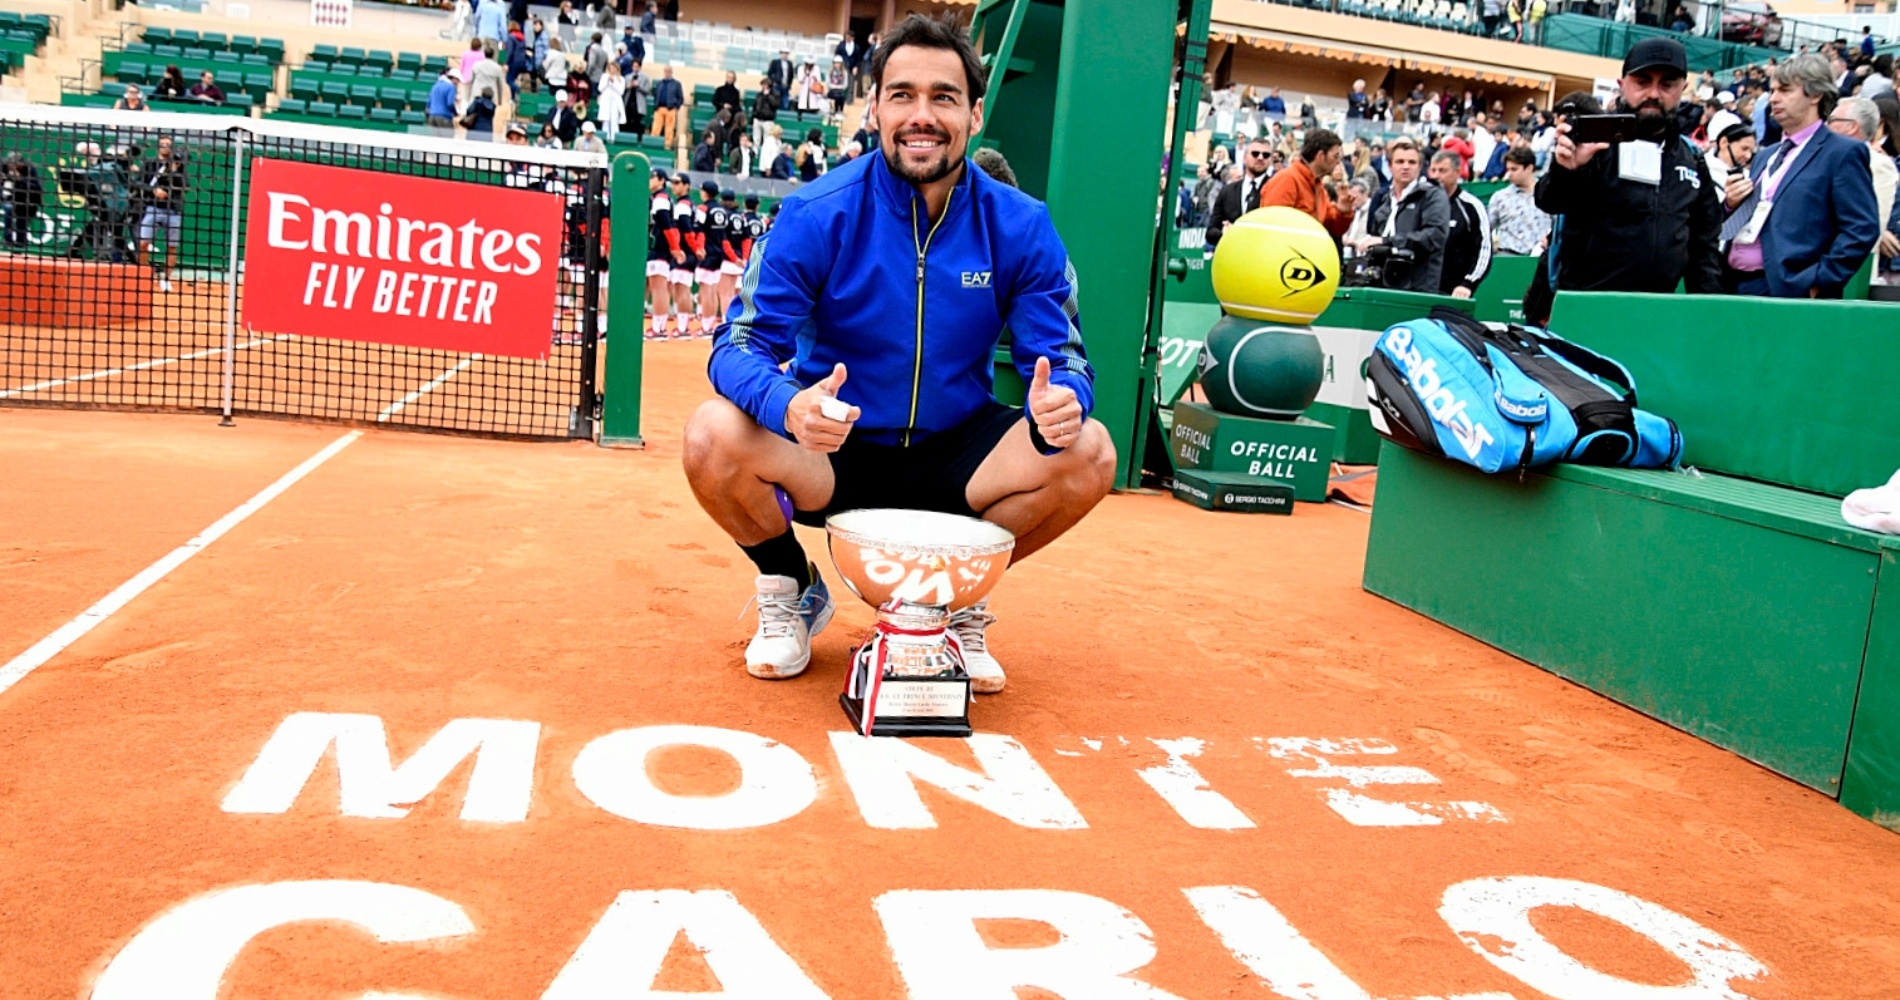 10 questions about the Rolex Monte-Carlo Masters